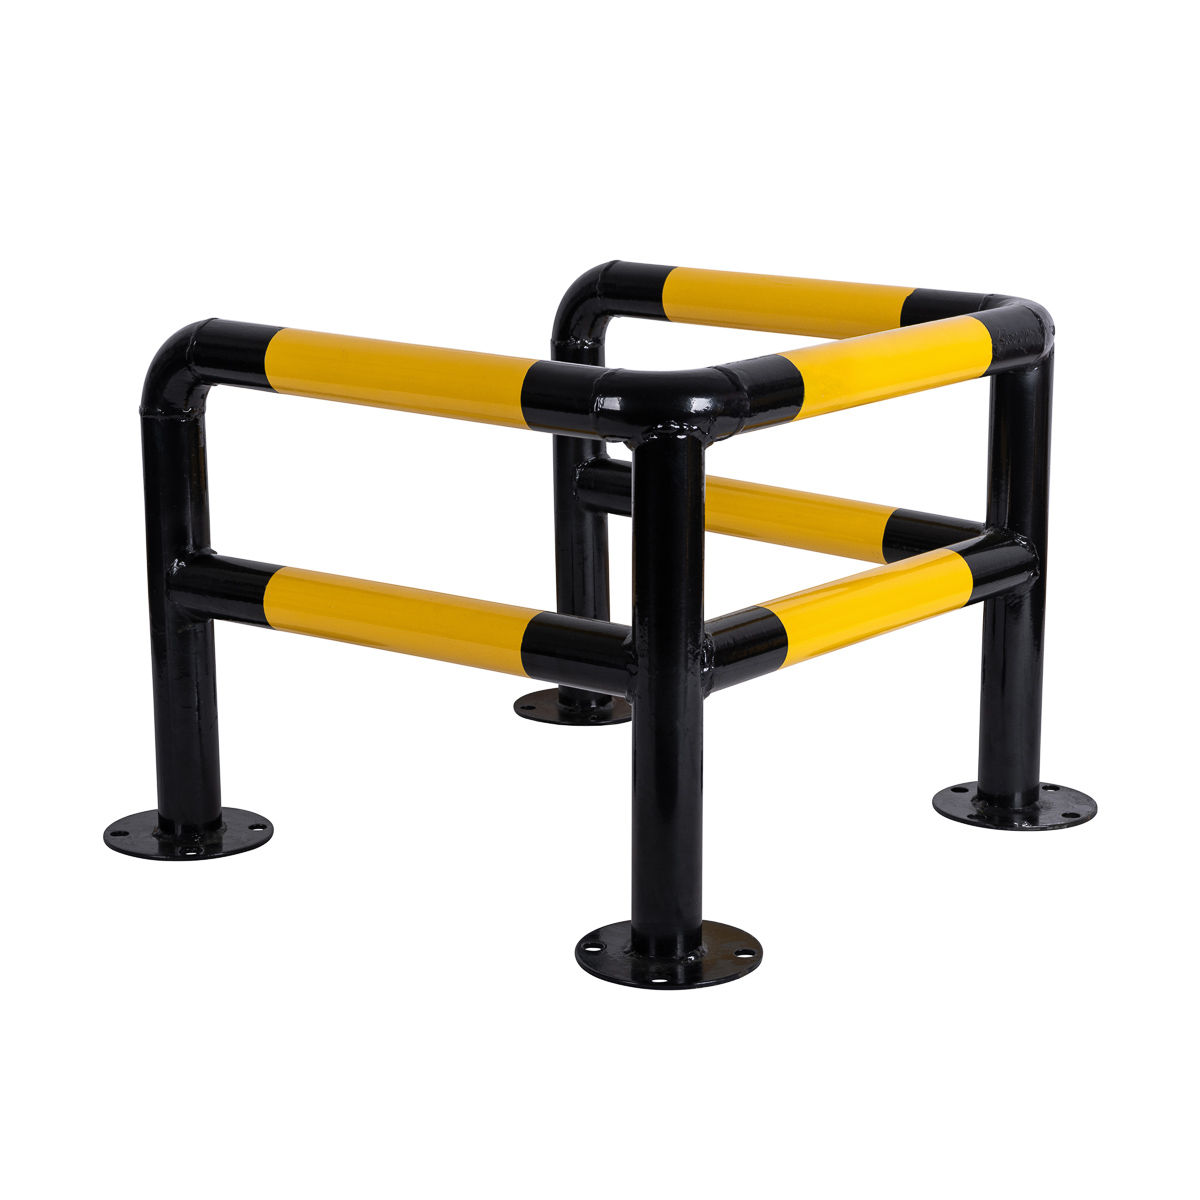 Steel Quad Post Barrier | 3 Side Protection| Black and Yellow 